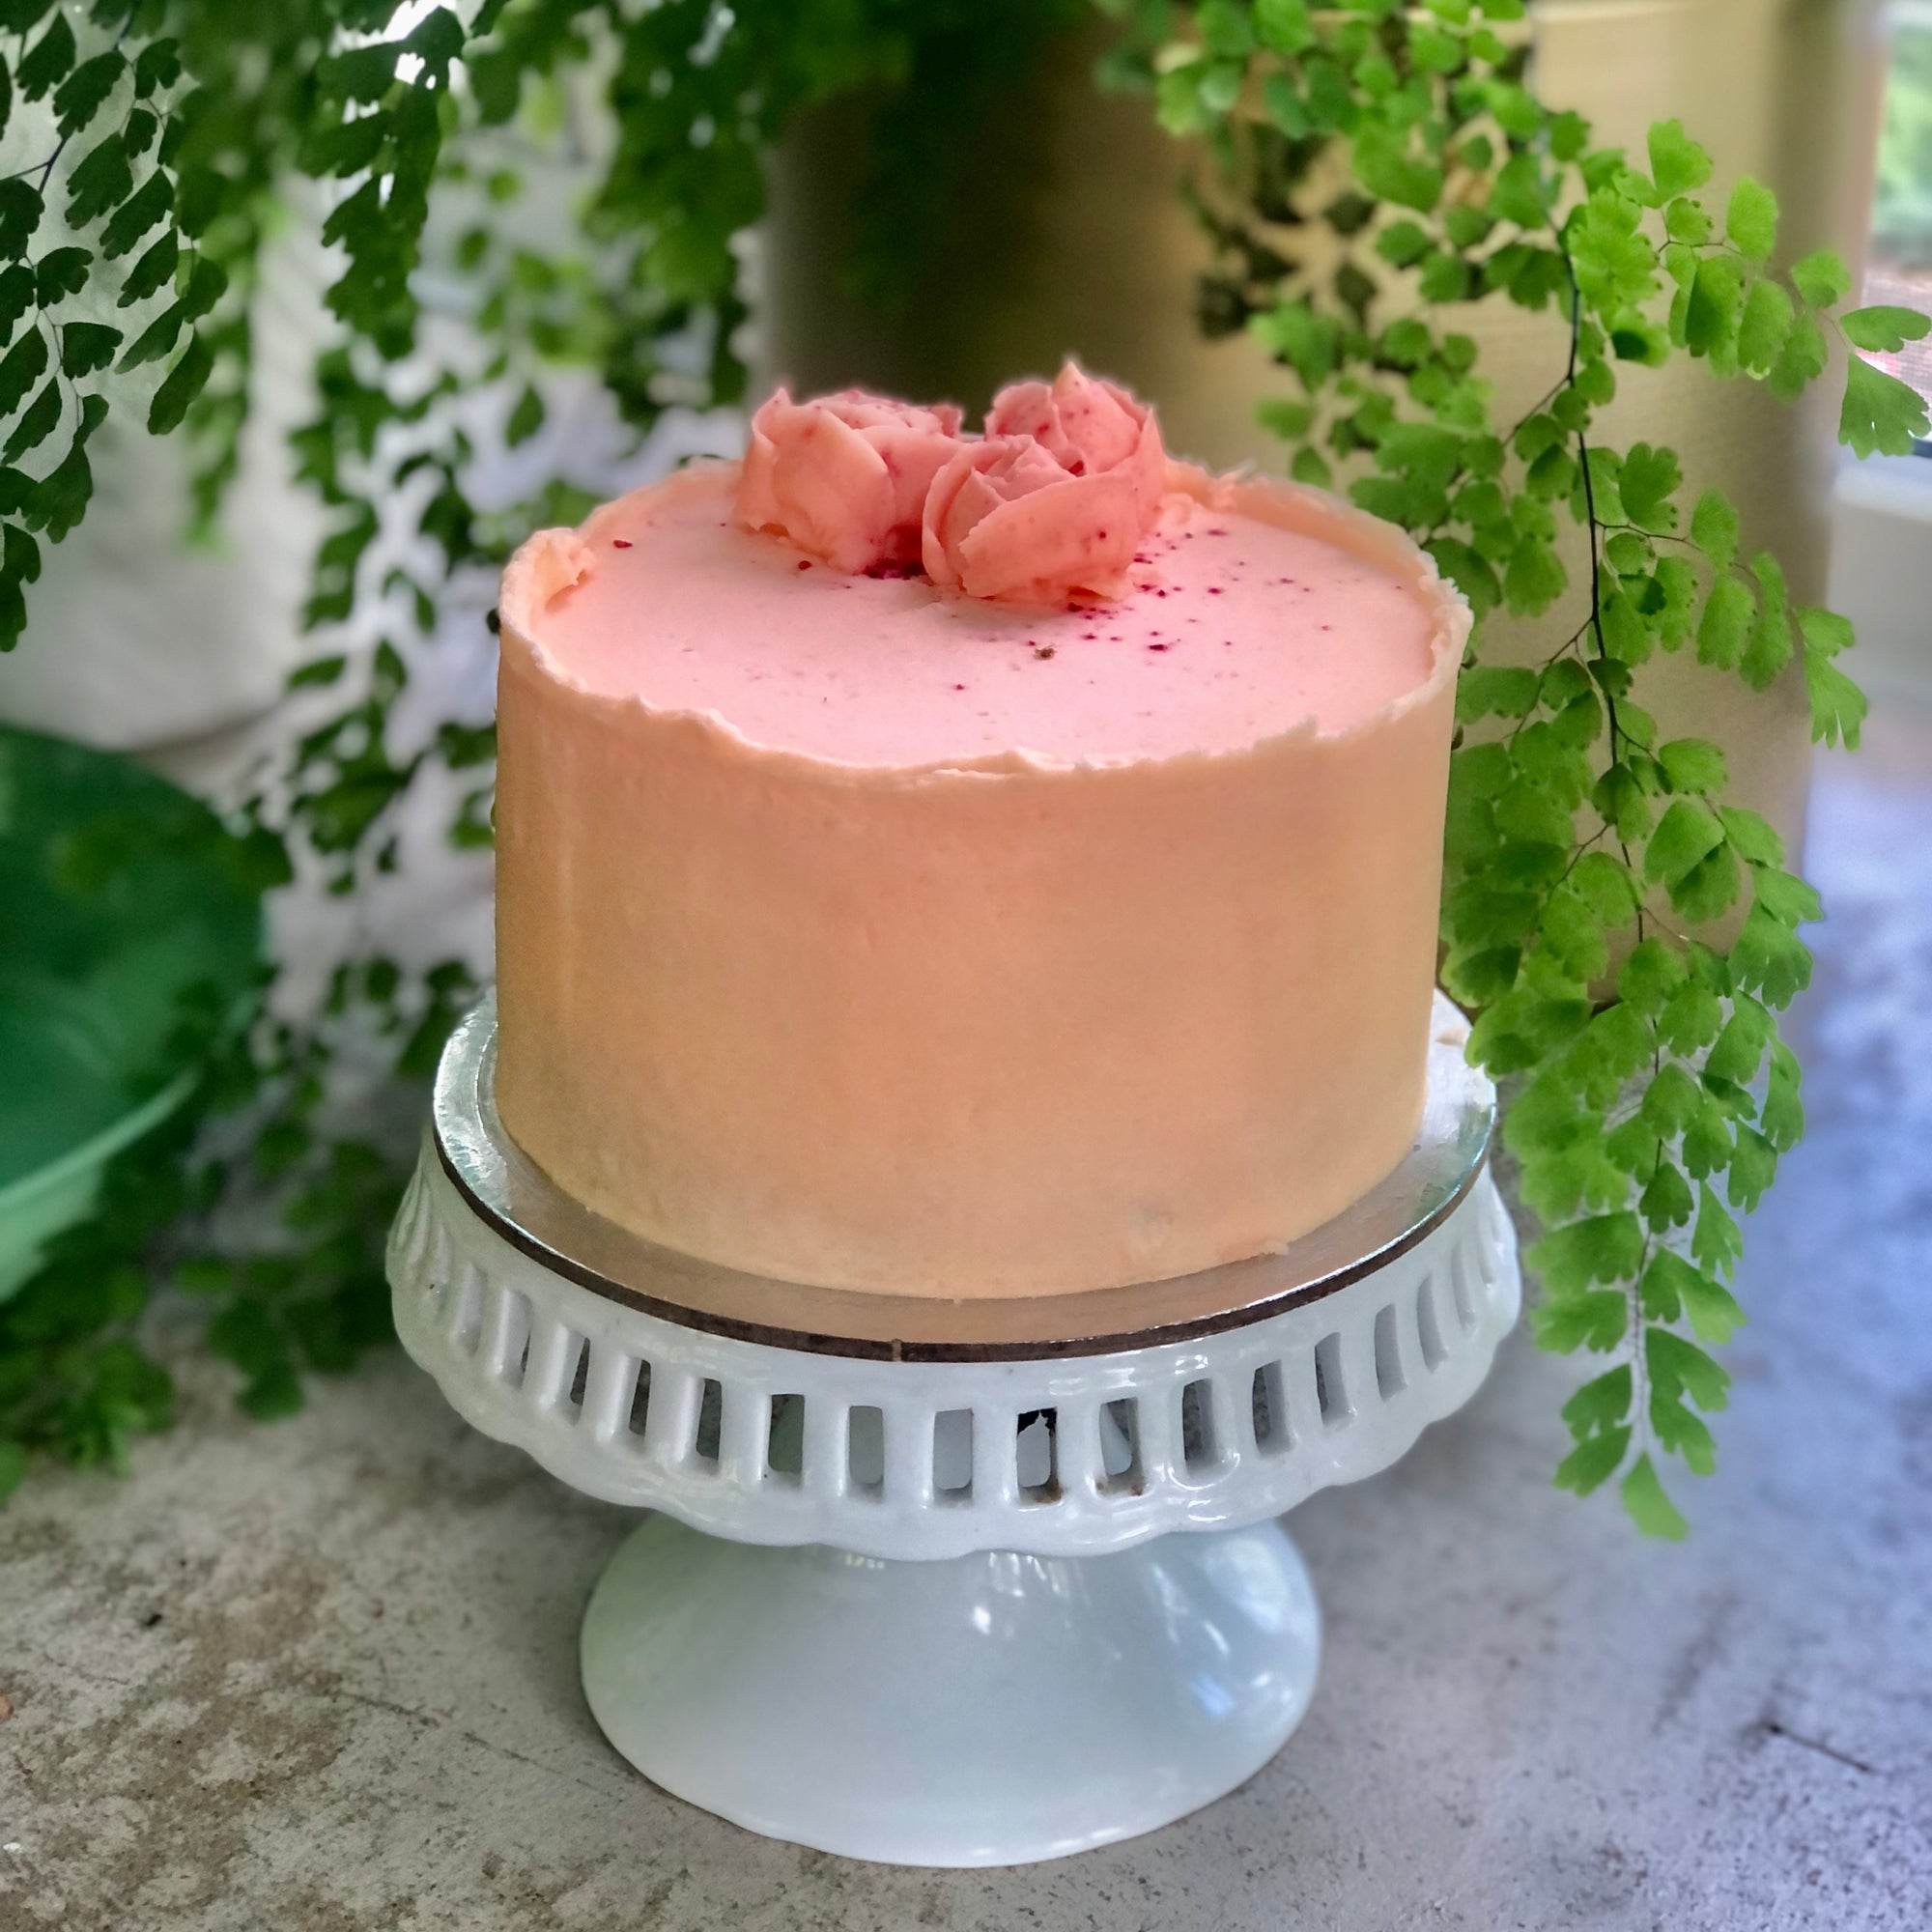 Last-Minute Mother's Day Gift Idea: Order Our Beautiful Rose Cake Online